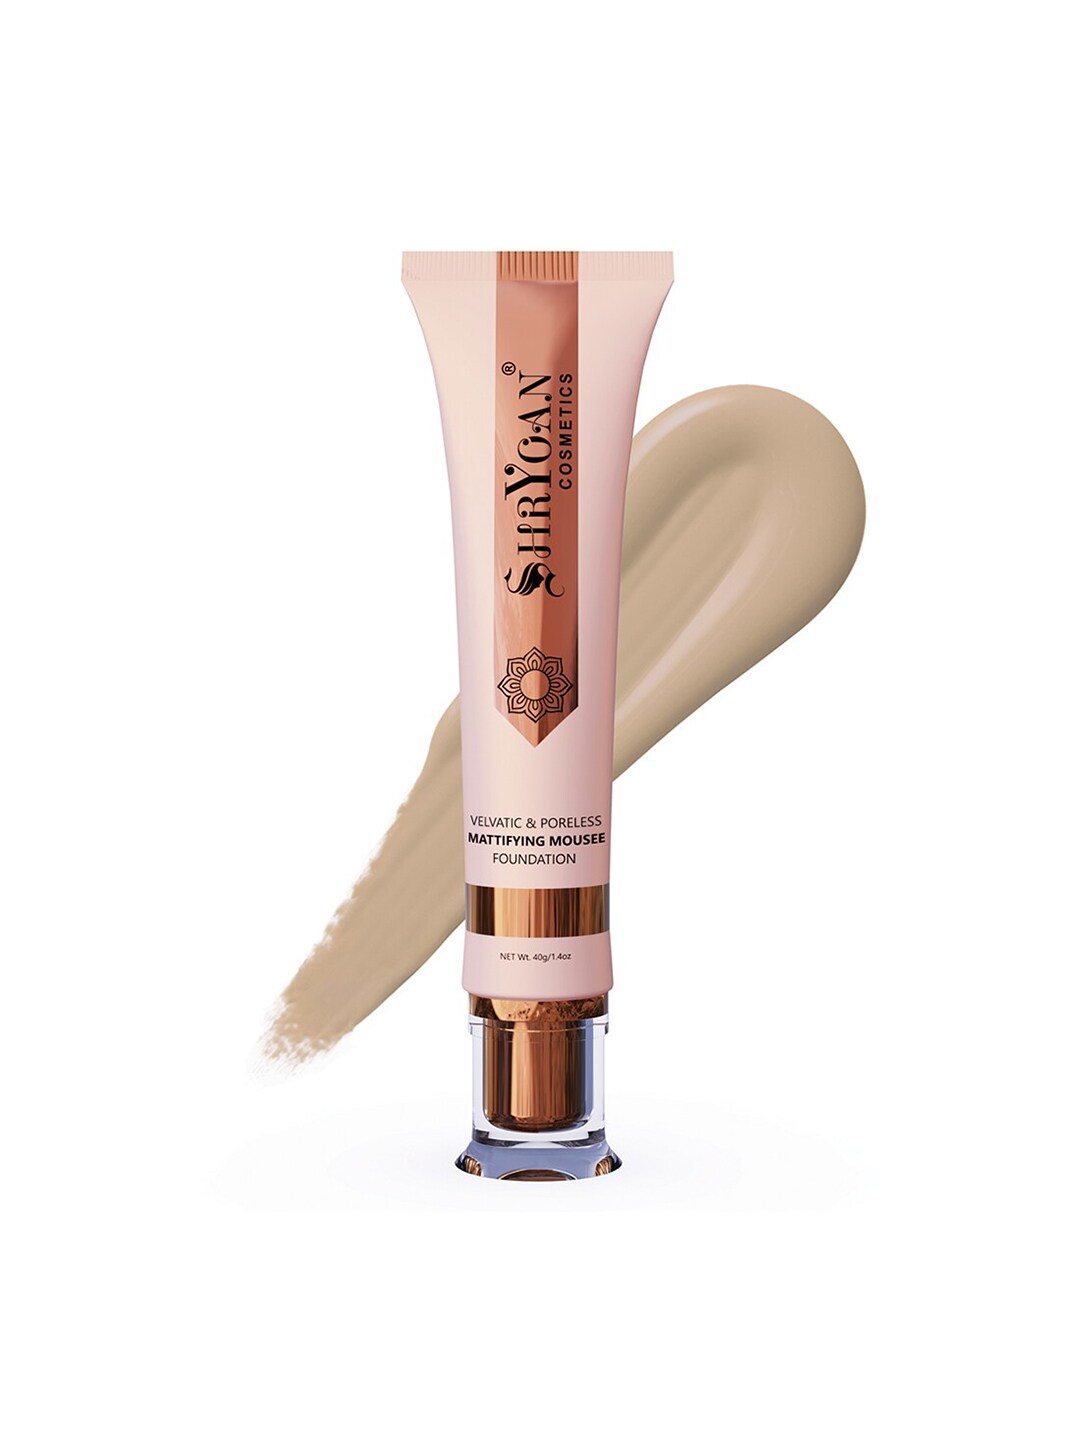 SHRYOAN Mattifying Mousee Foundation 40g Price in India